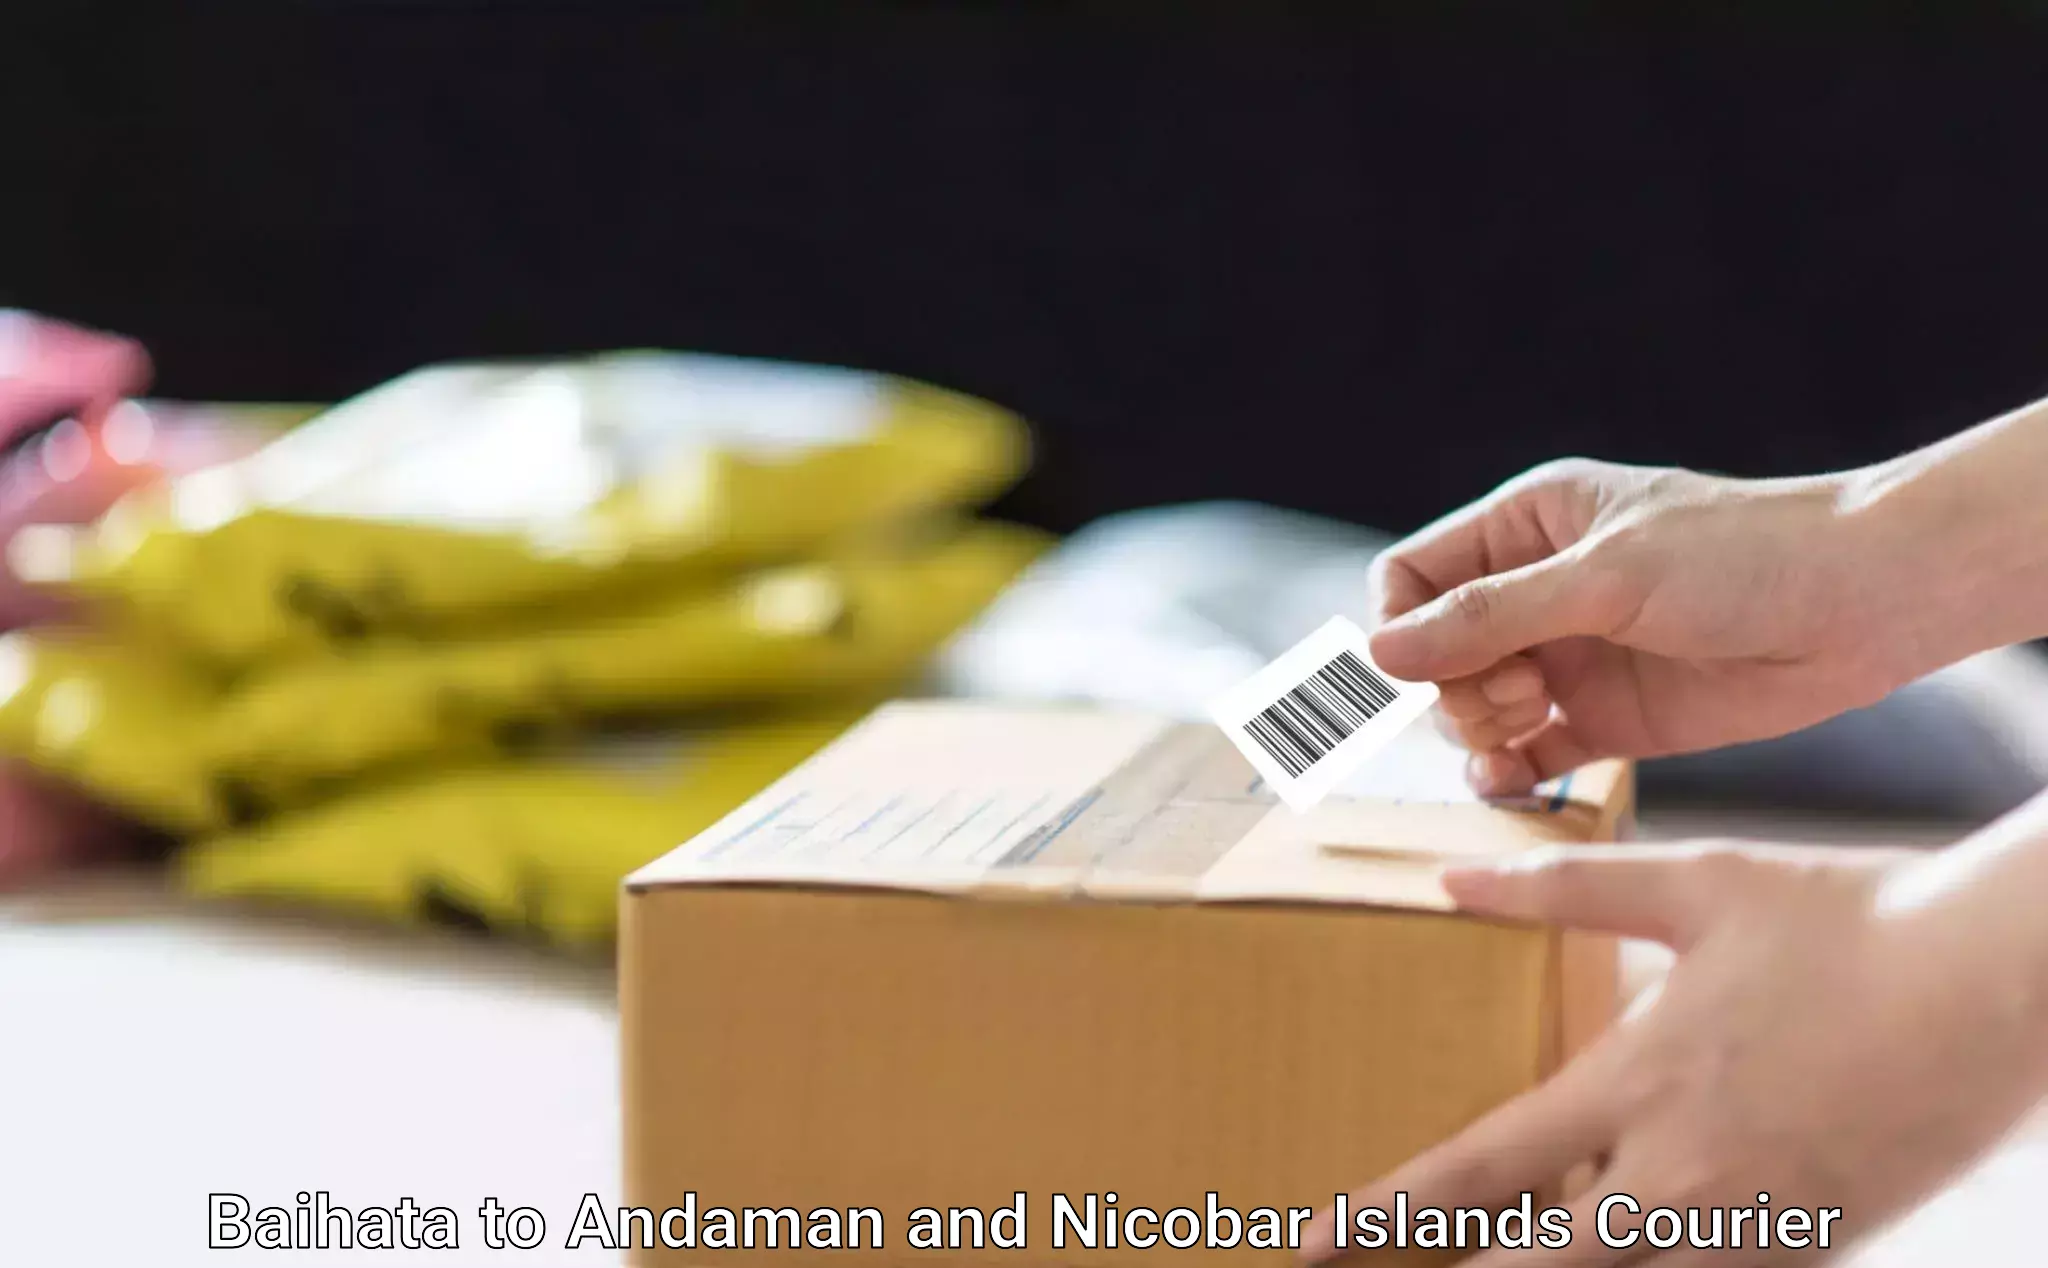 Personal parcel delivery Baihata to Andaman and Nicobar Islands